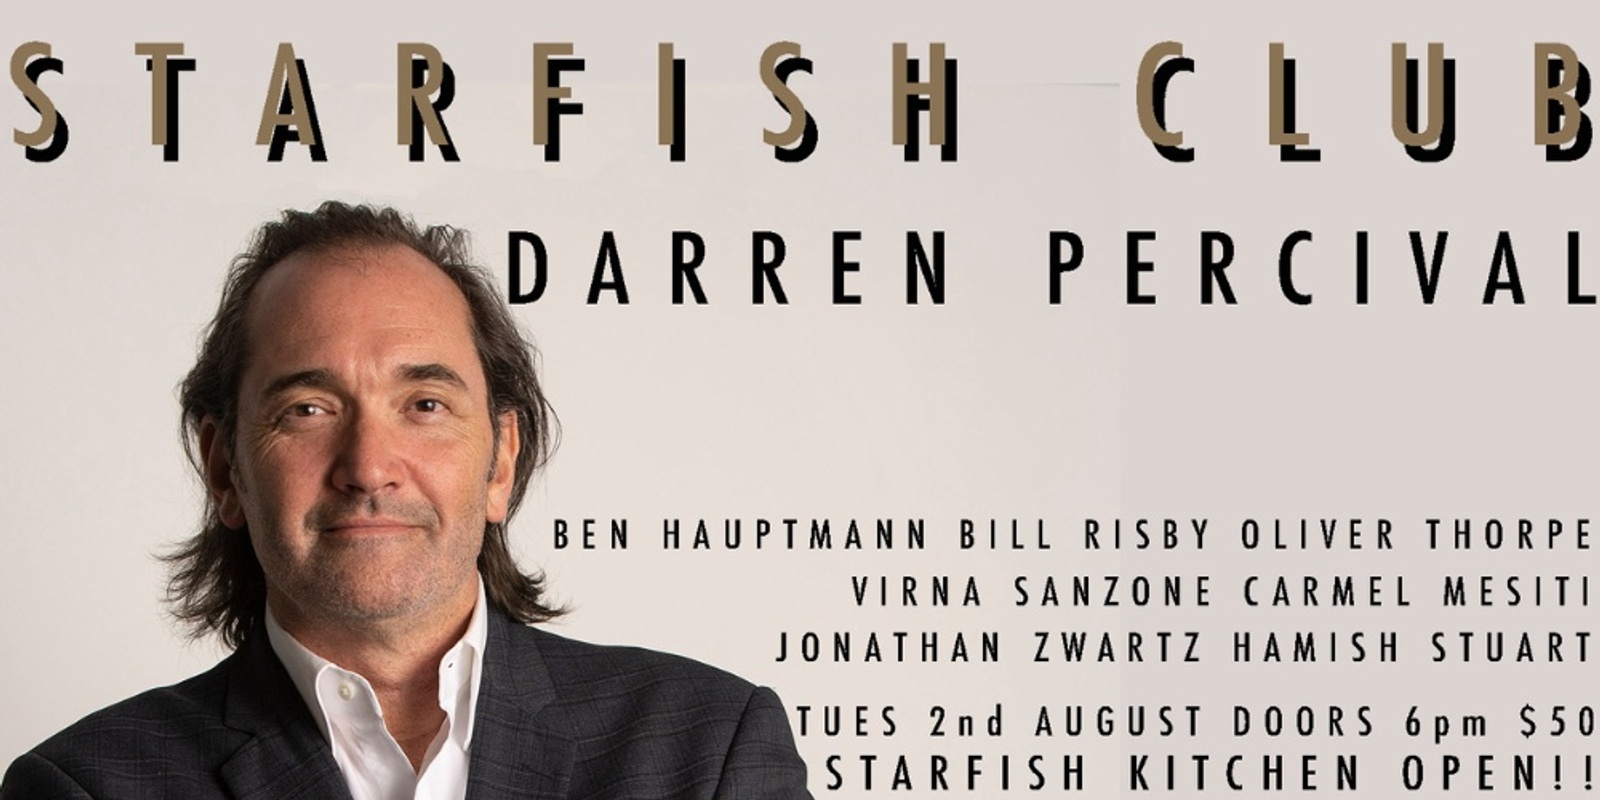 Banner image for Starfish Club Darren Percival 2 August 2022